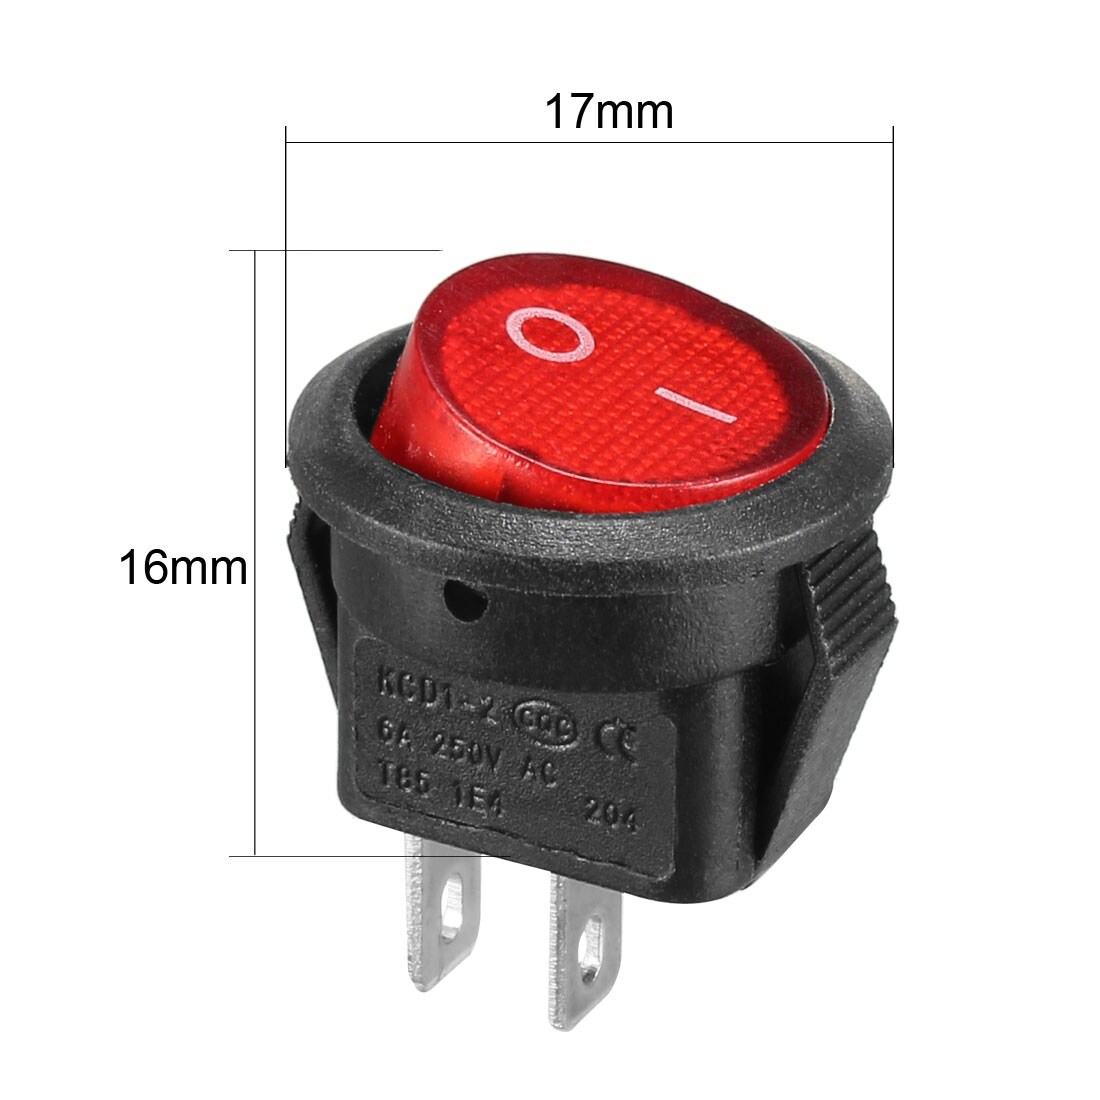 5x 12mm AC 250V/15A ON/OFF 2 Position SPST Metal Rocker Toggle Switch